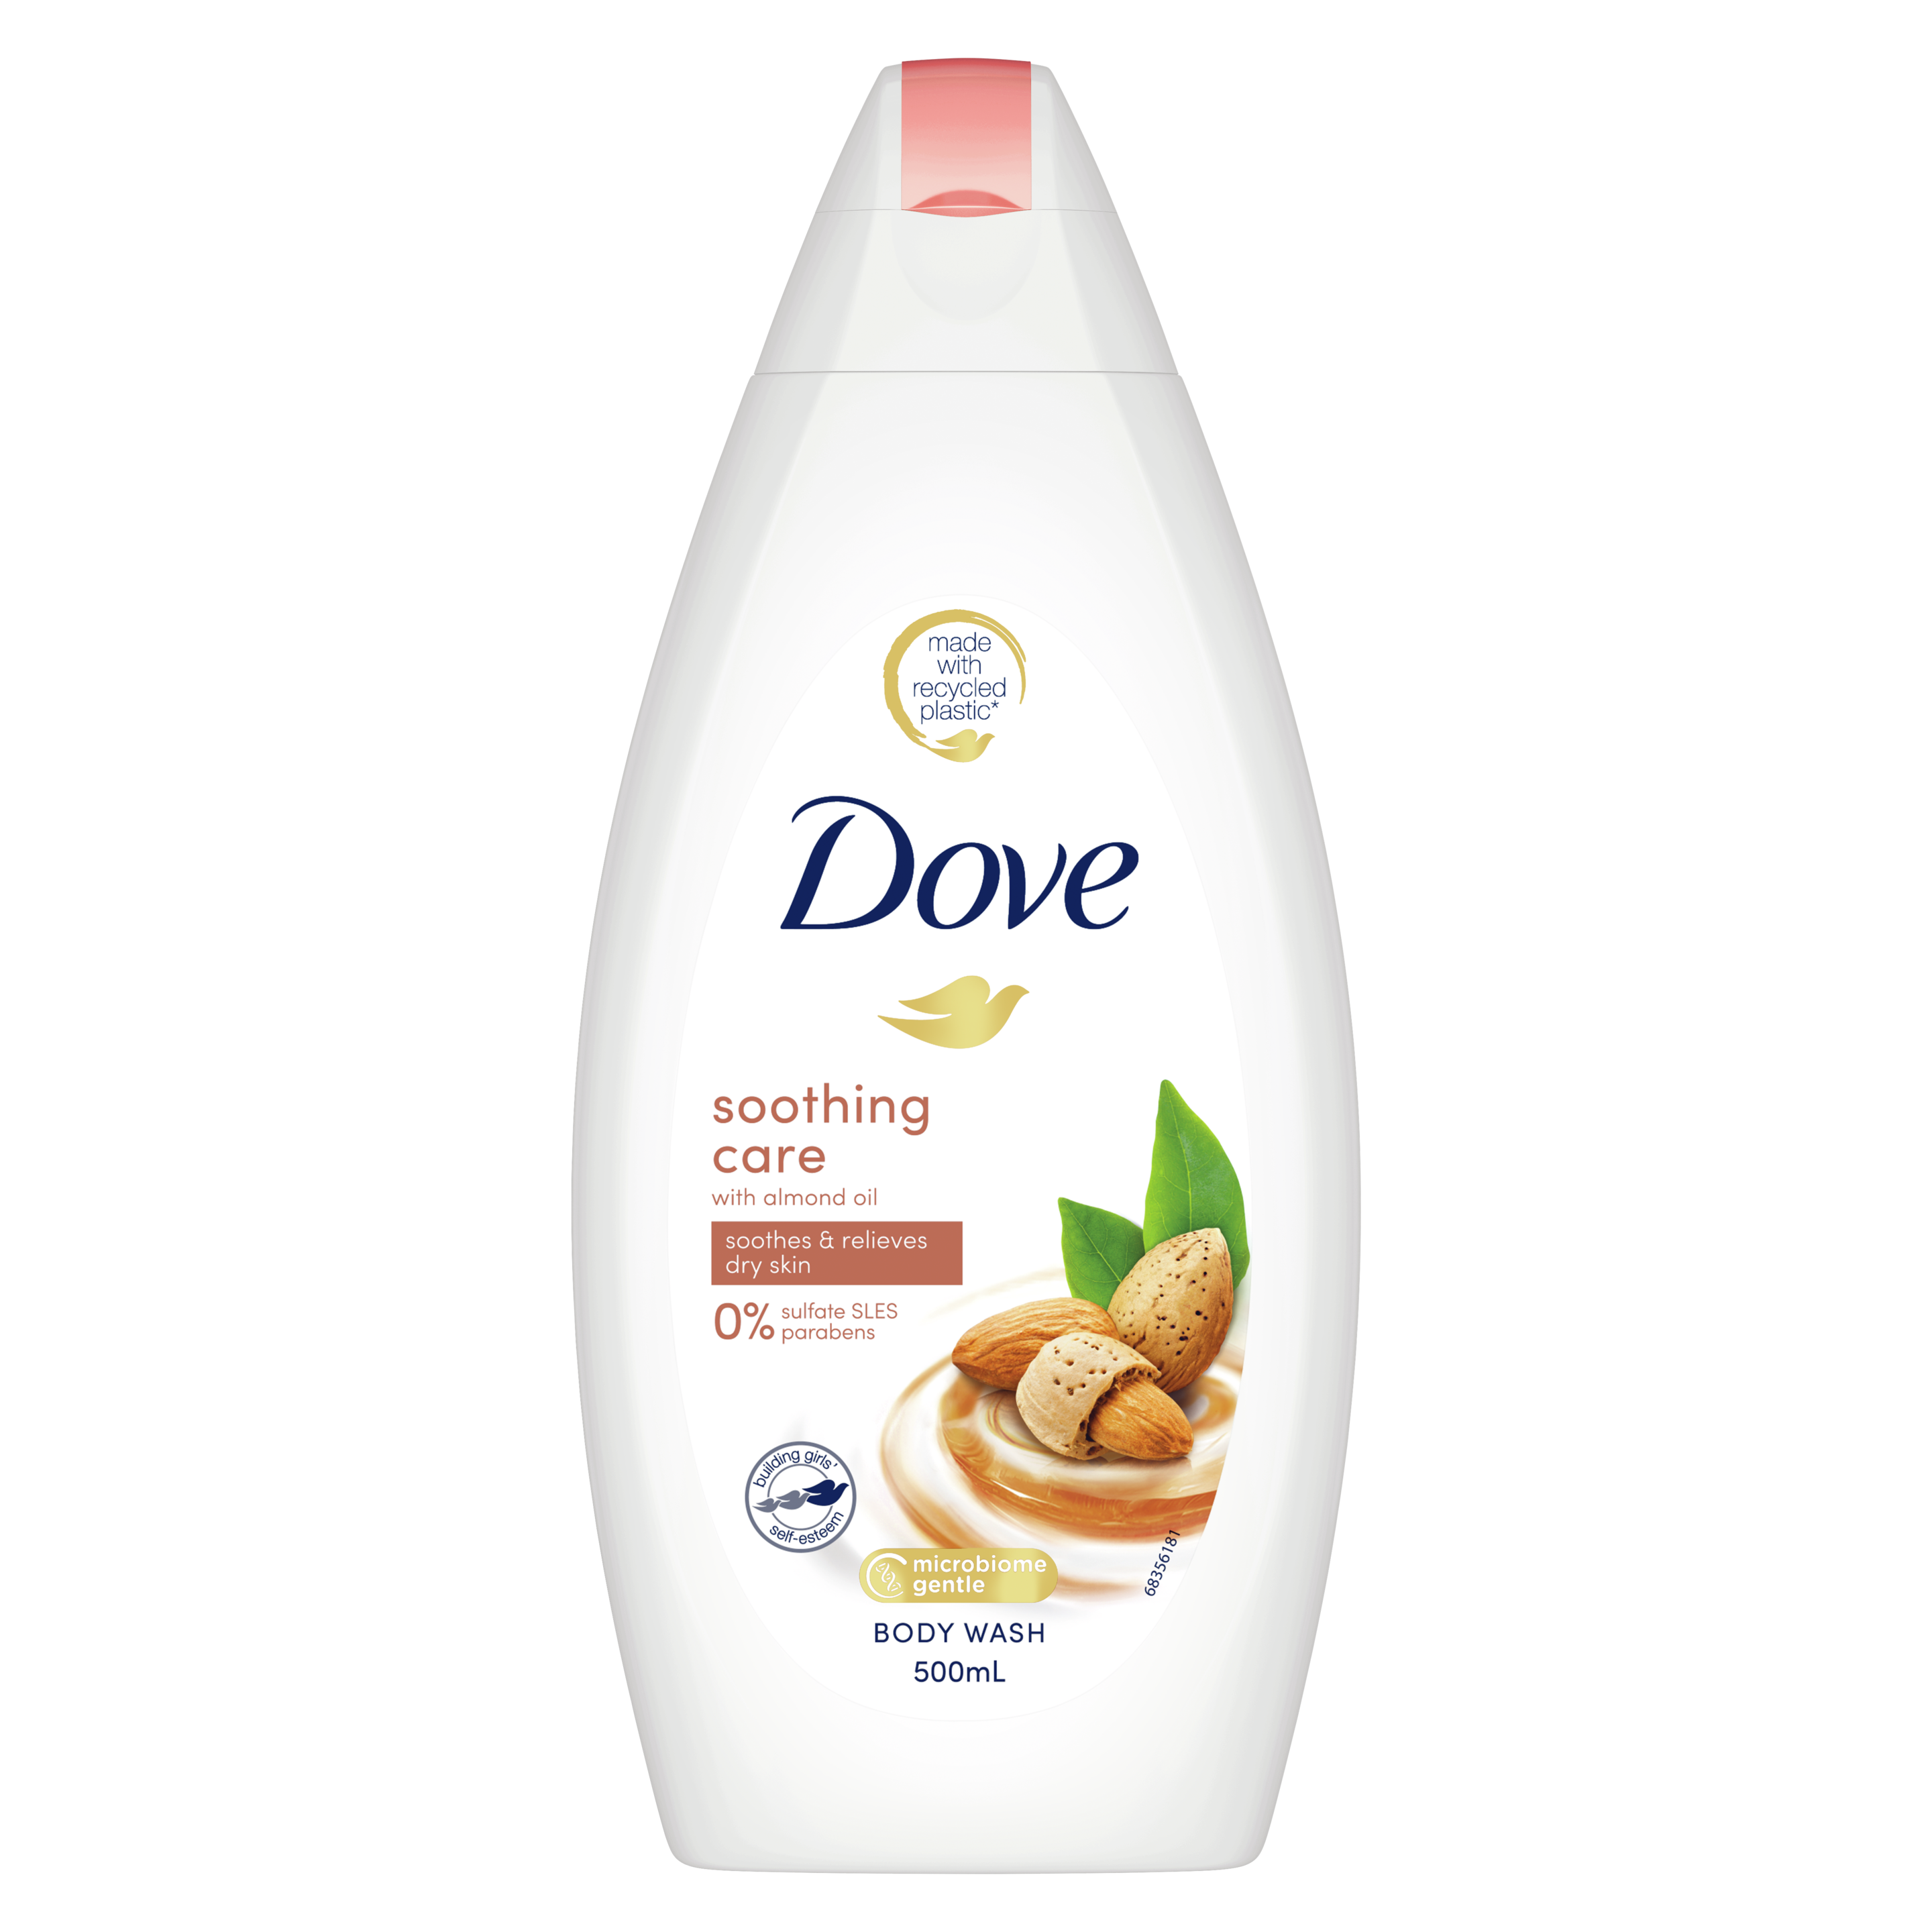 Dove Soothing Care Body Wash 500ml Text